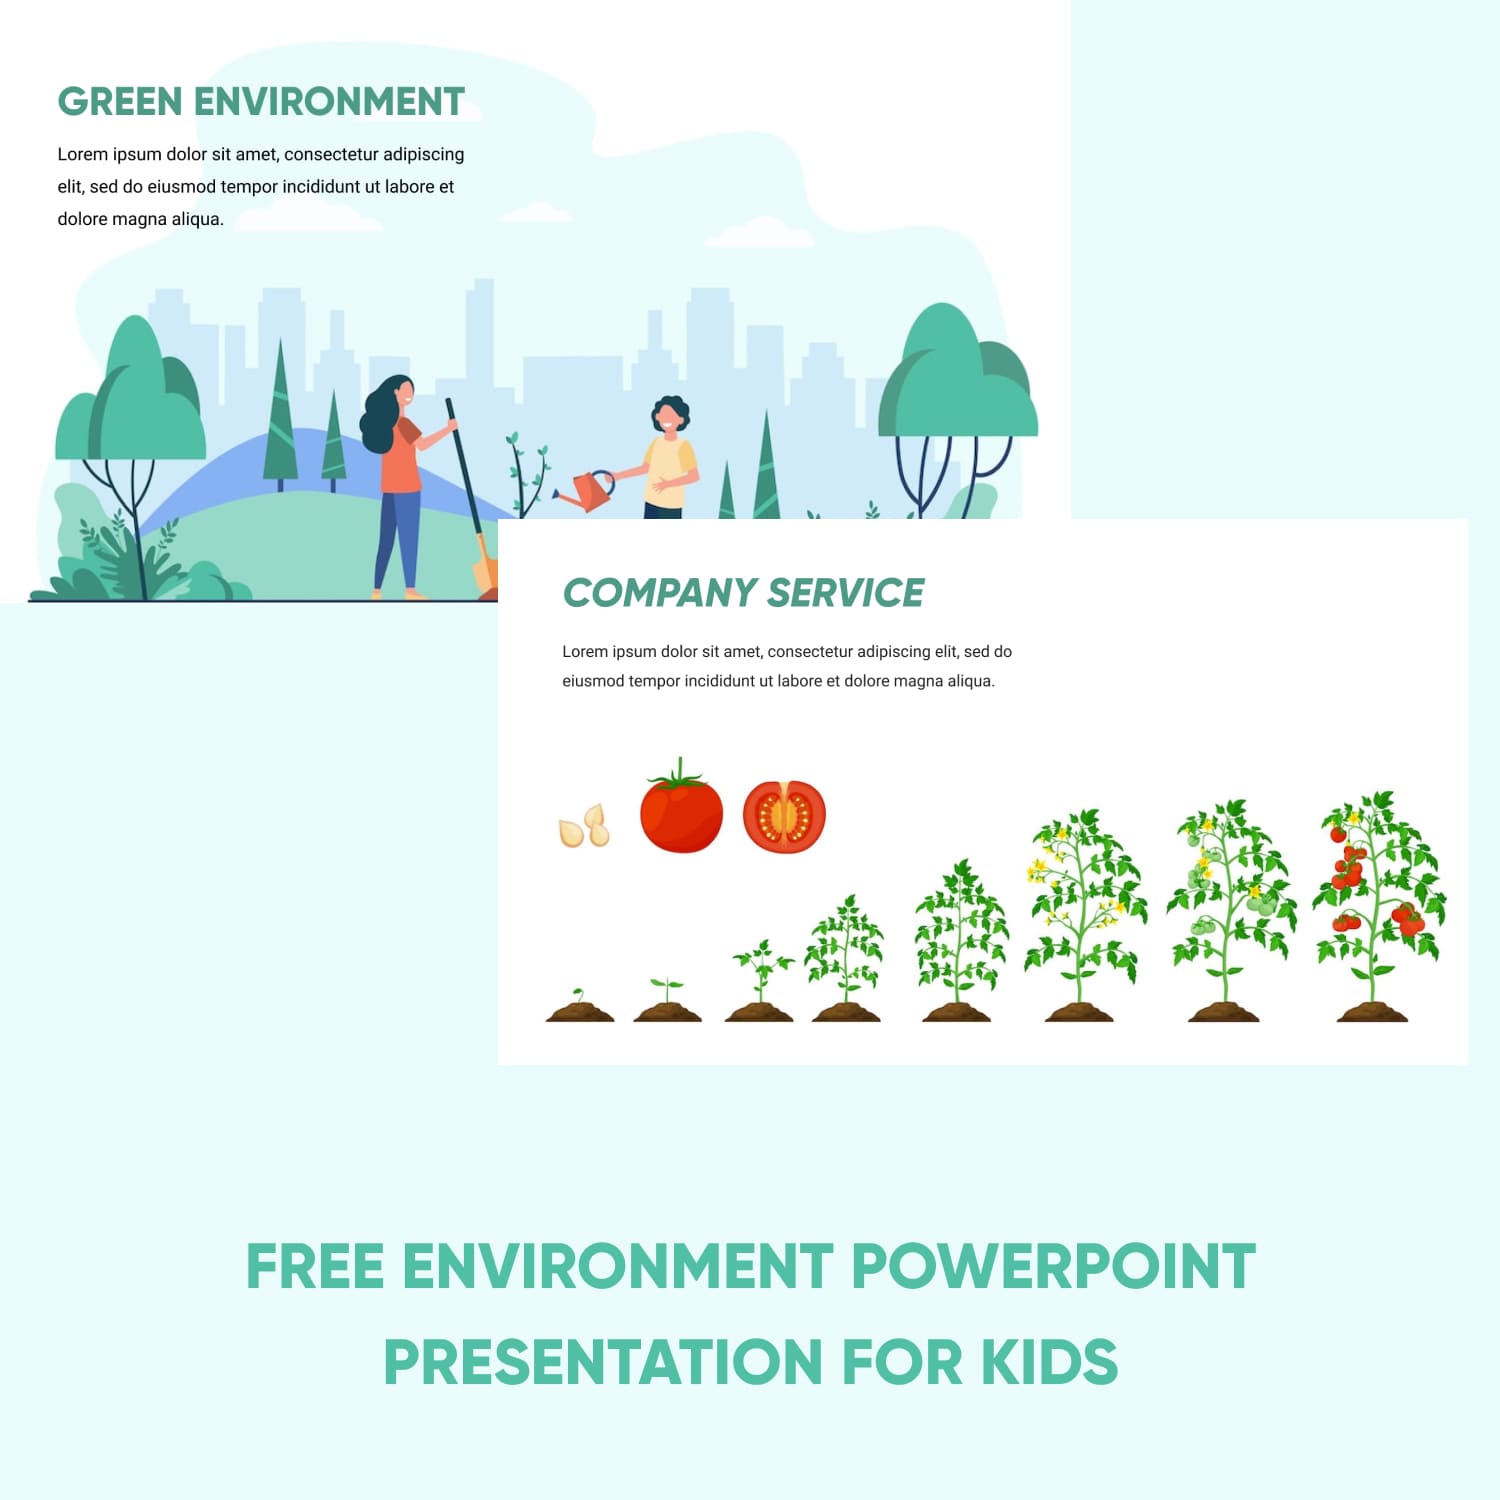 Free Environment Powerpoint Presentation For Kids.